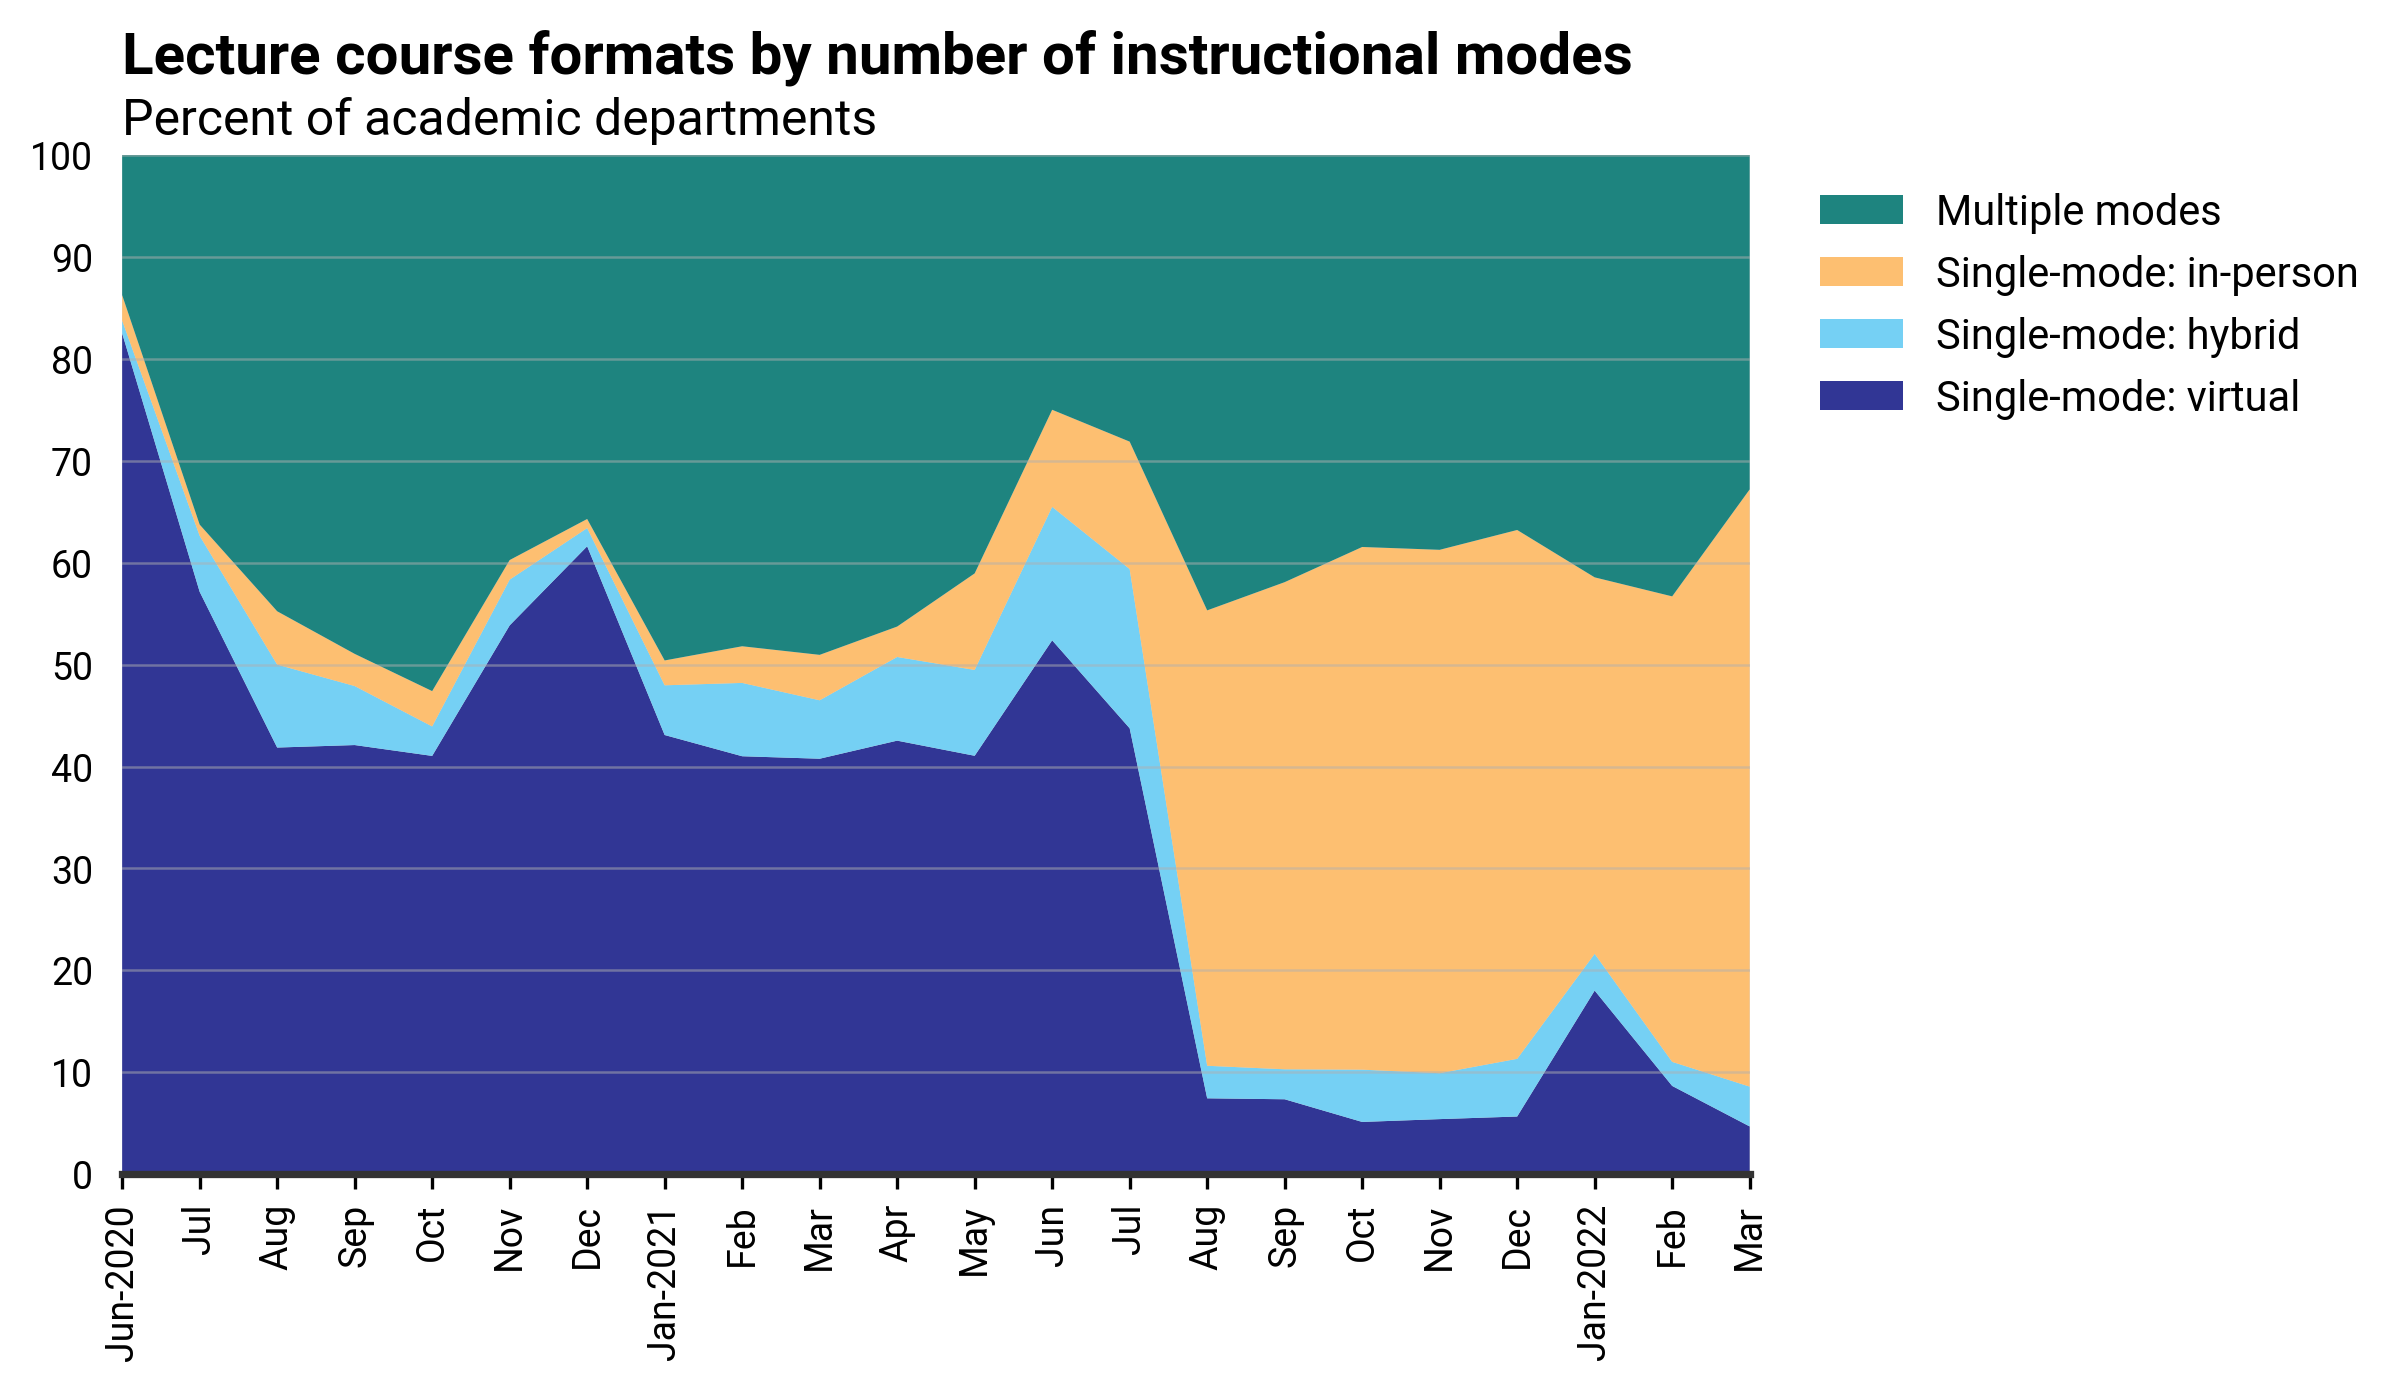 DB_2022-004 chart 02: Lecture course formats by number of instructional modes (Credit: AGI; data from AGI&#039;s Geoscience COVID-19 Survey)